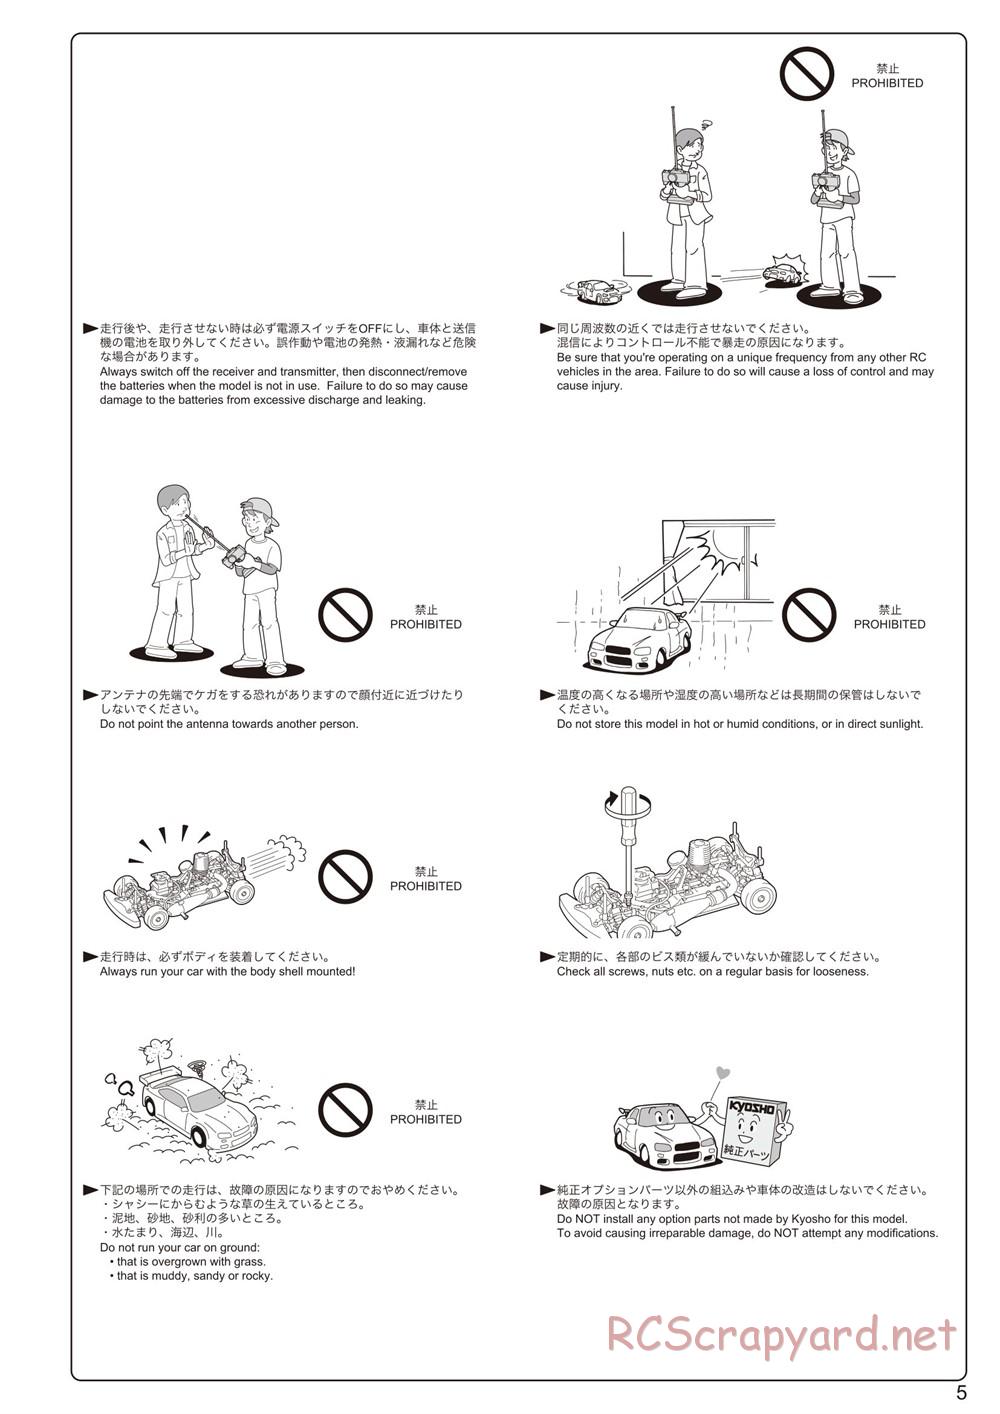 Kyosho - Ultima RB6 (2015) - Manual - Page 5